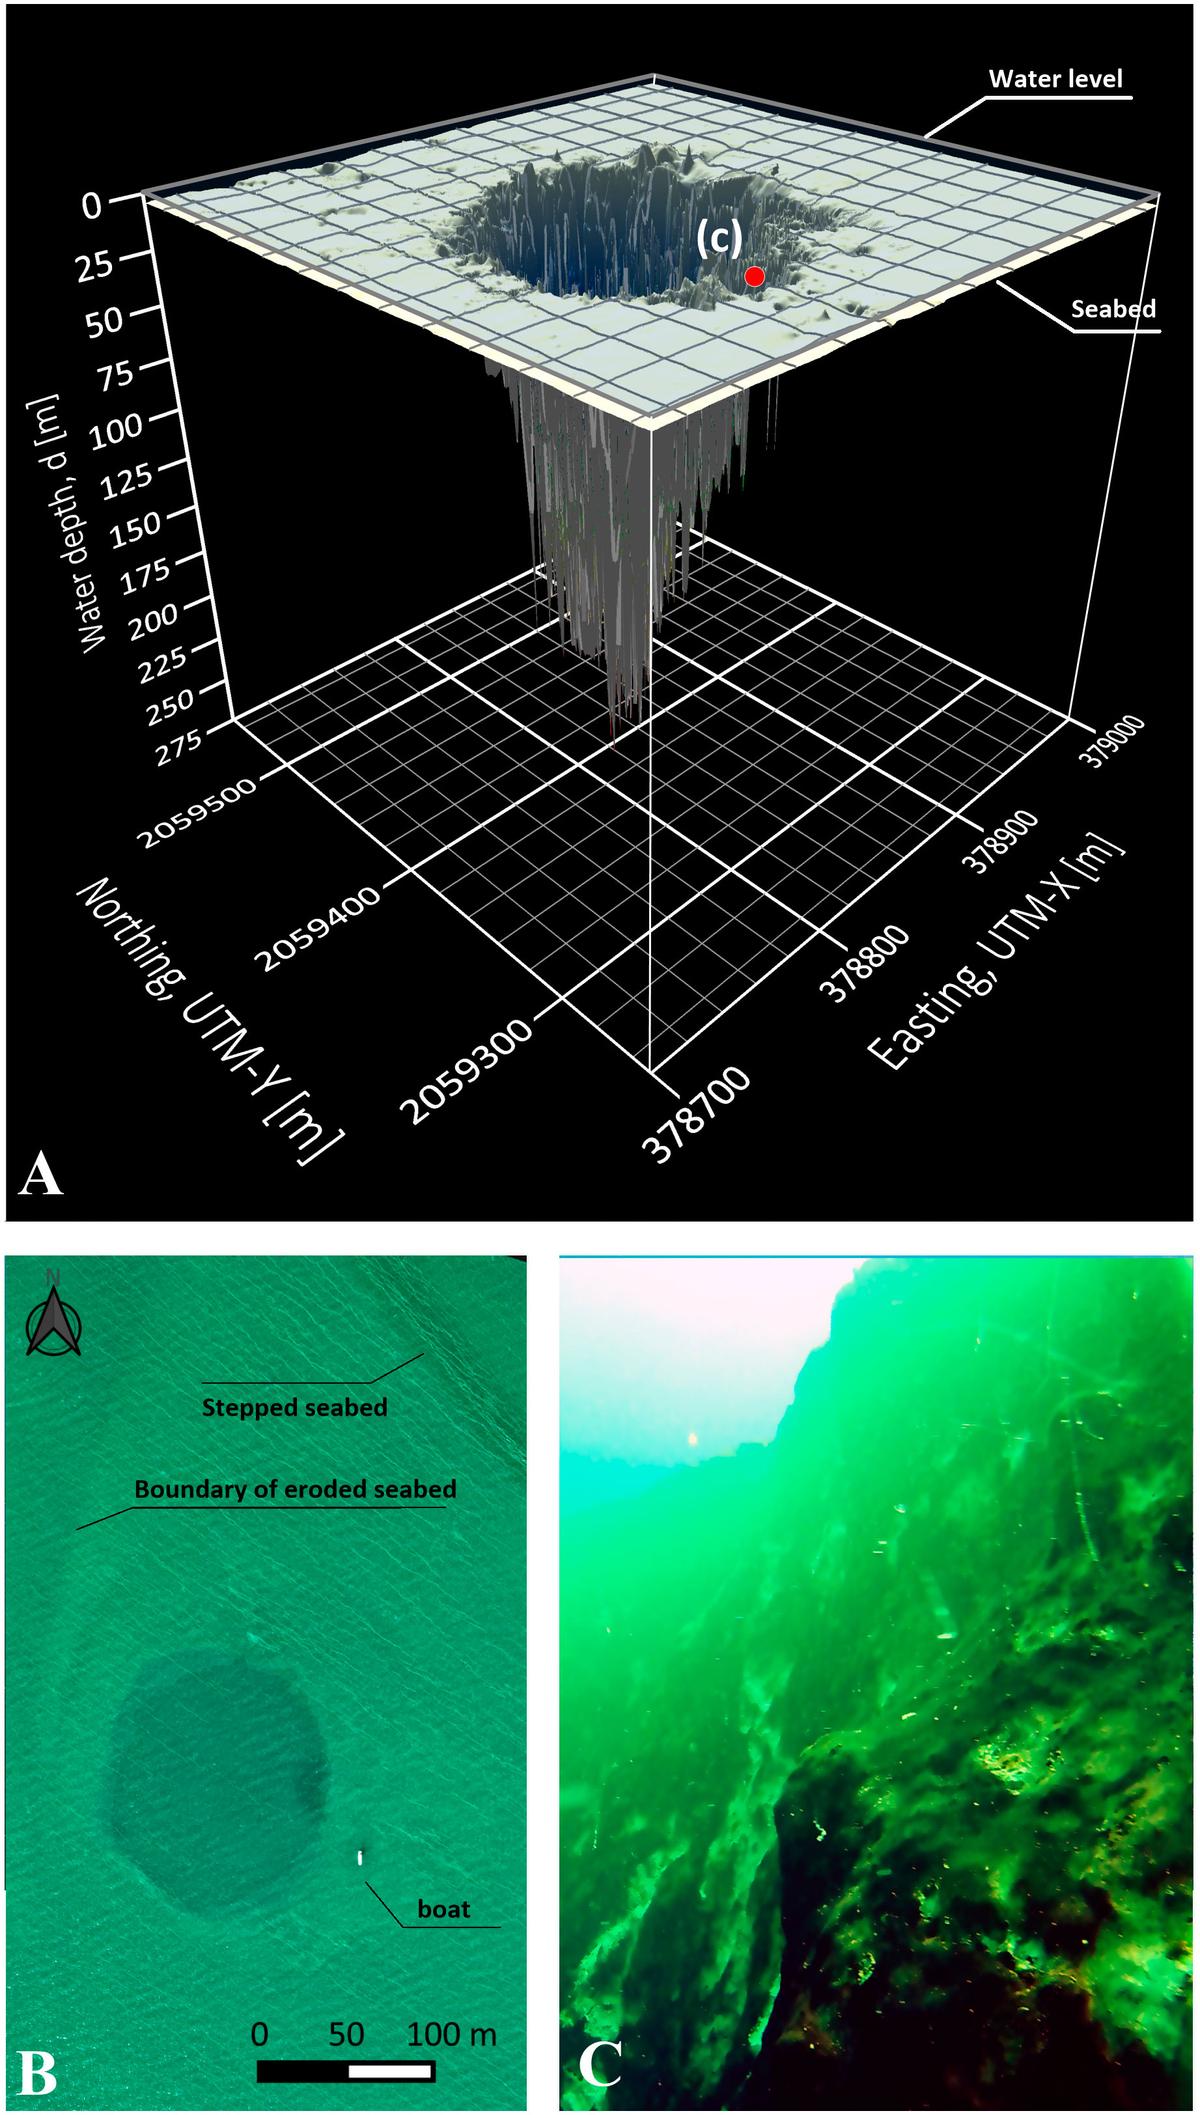 Figure 2: (A) 3D morphological map of Taam ja’ Blue Hole starting at the seabed of Chetumal Bay descending to a depth of 274.4 meters depth; (B) Aerial drone image of the blue hole, seabed features surrounding the entrance of the blue hole and size comparison with a boat 8.5 meters in length; (C) Subaquatic view of the mouth of the hole from 20 meters deep oriented along the southern wall. (<a href="https://www.frontiersin.org/articles/10.3389/fmars.2023.1141160/full">© 2023 Alcérreca-Huerta, Álvarez-Legorreta, Carrillo, Flórez-Franco, Reyes-Mendoza and Sánchez-Sánchez</a>/CC BY 4.0)